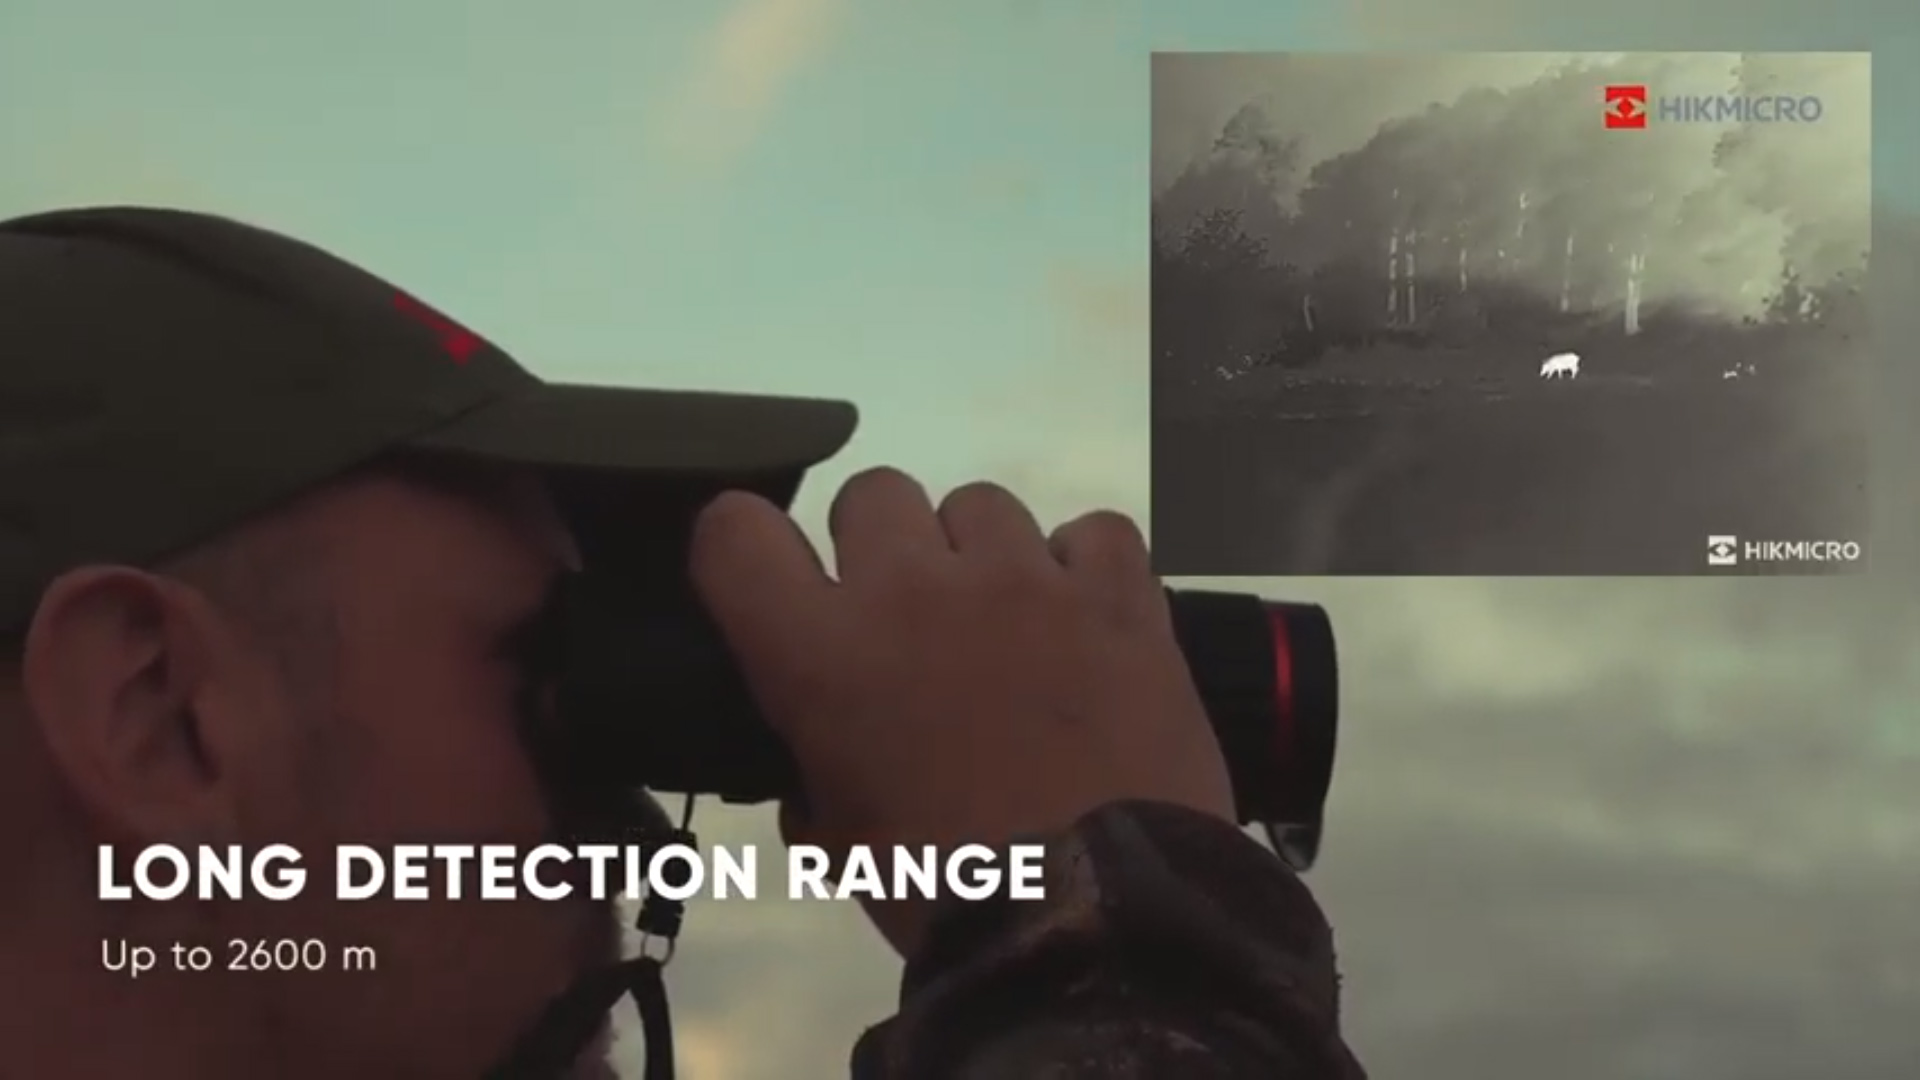 The long detection range is highlighted in this image by an operator looking throuhg the 
                  device and a picture in picture display showing the long distance view.